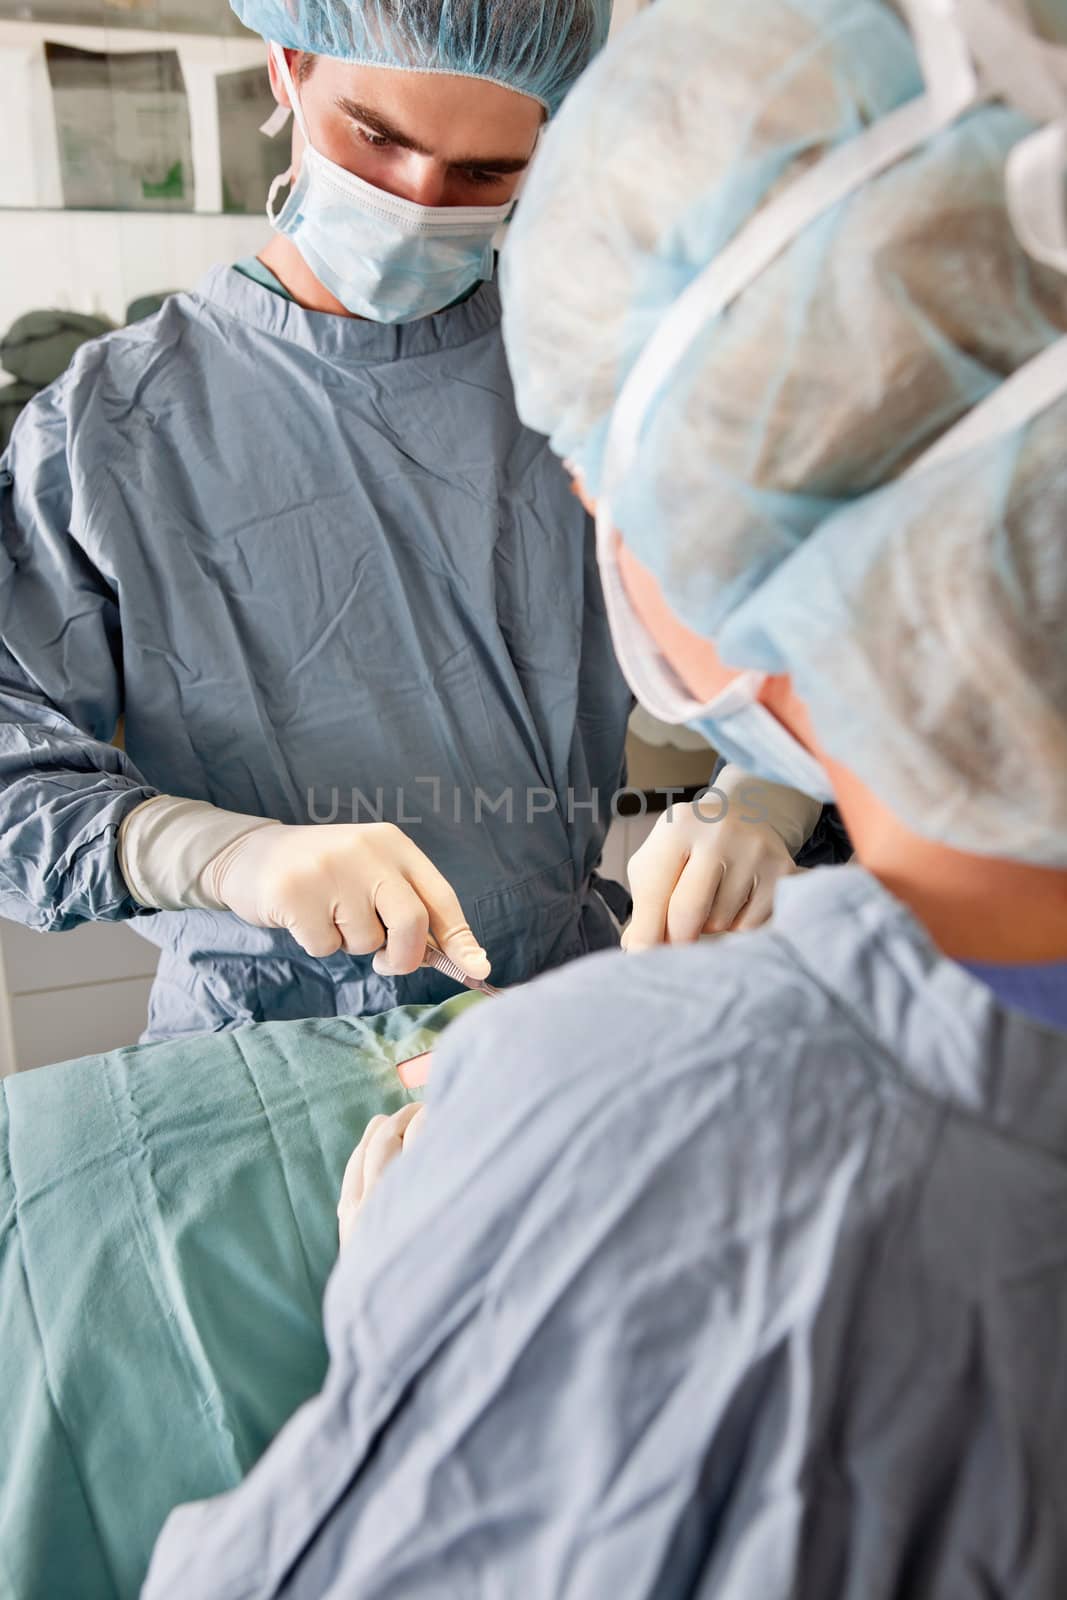 Surgeons operating on patient by leaf